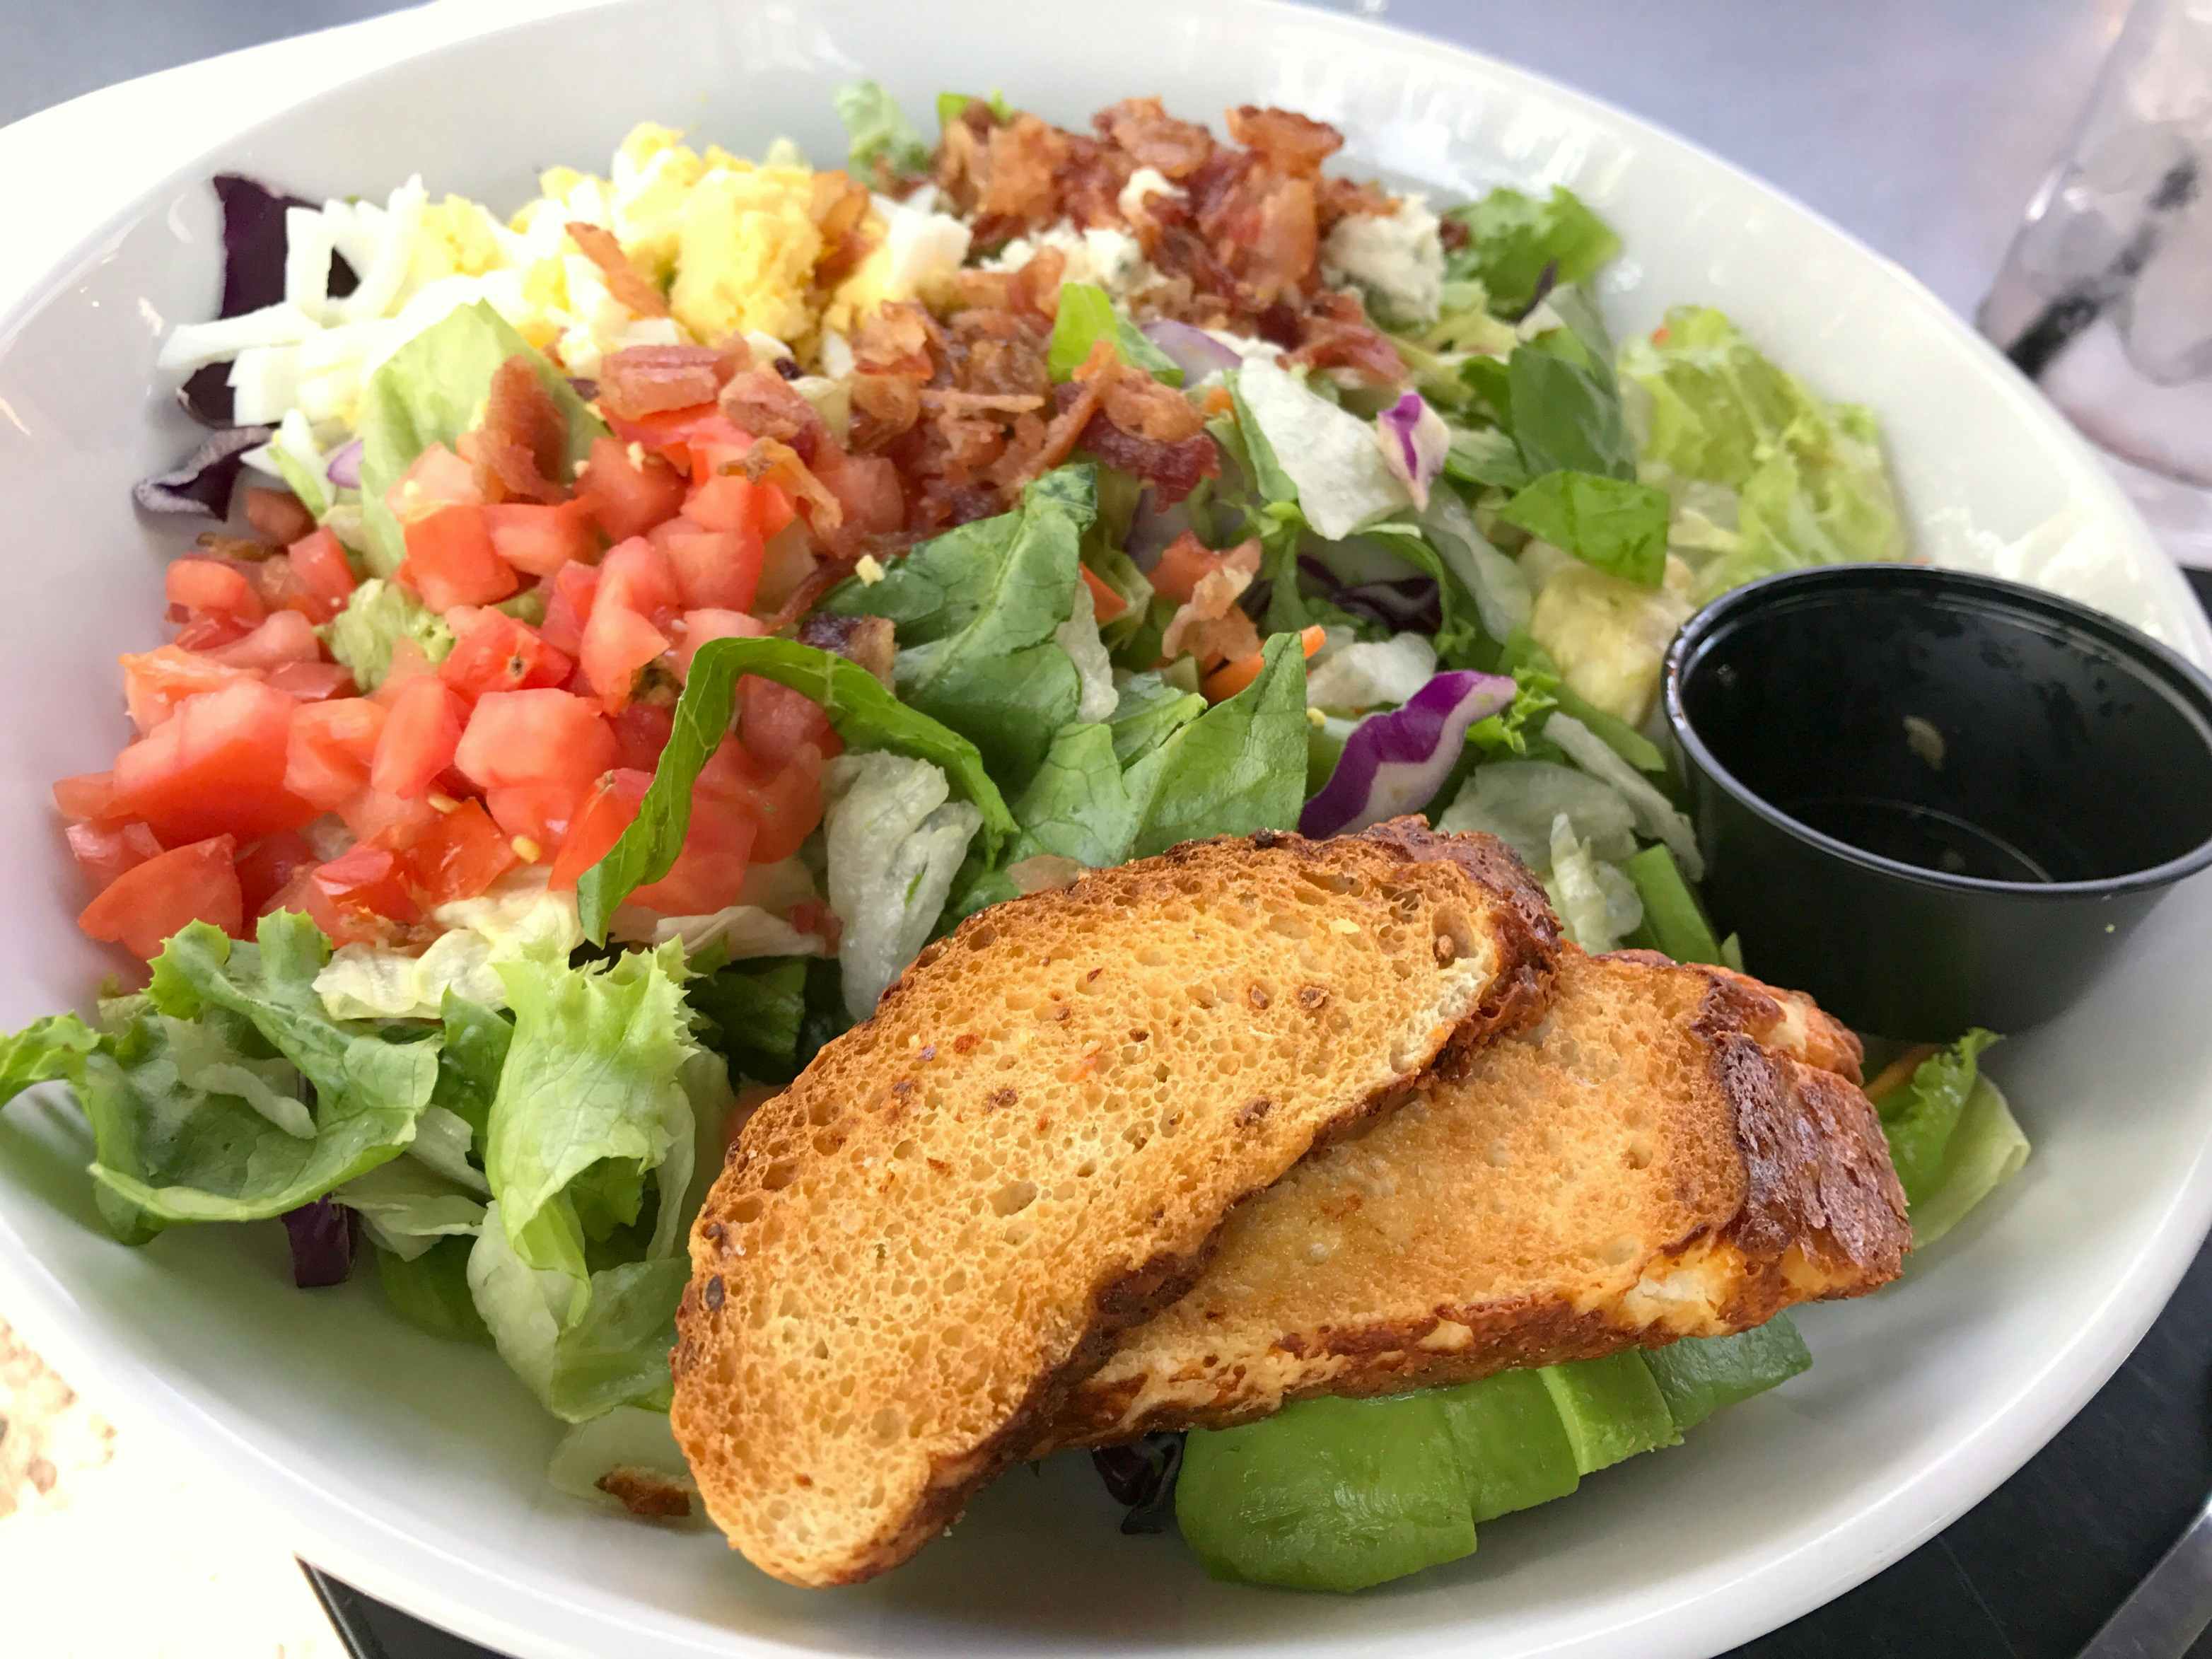 A close-up of a Red Robin salad with a dressing cup and two small pieces of bread.